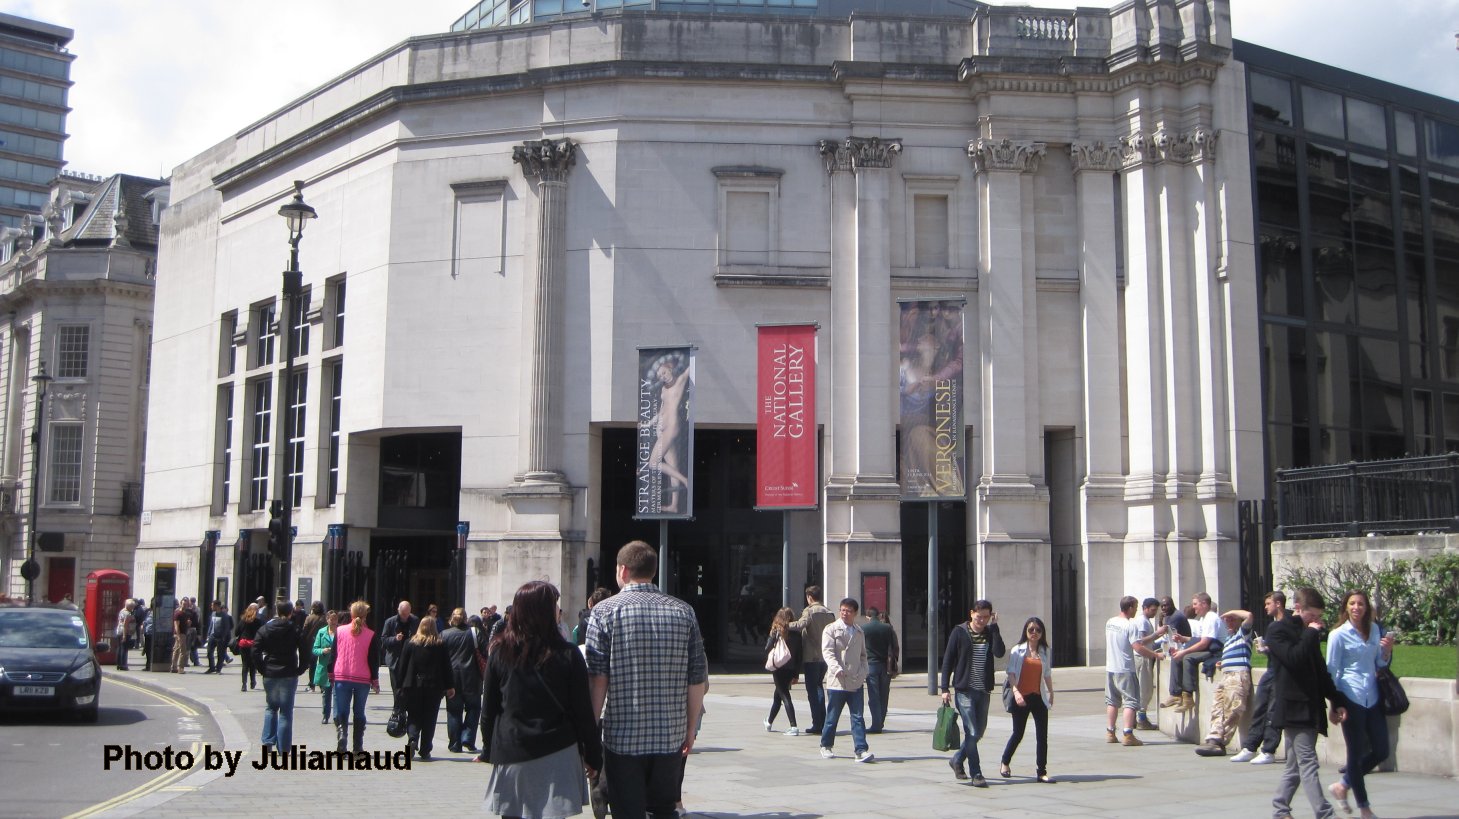 sainsbury wing of National Gallery